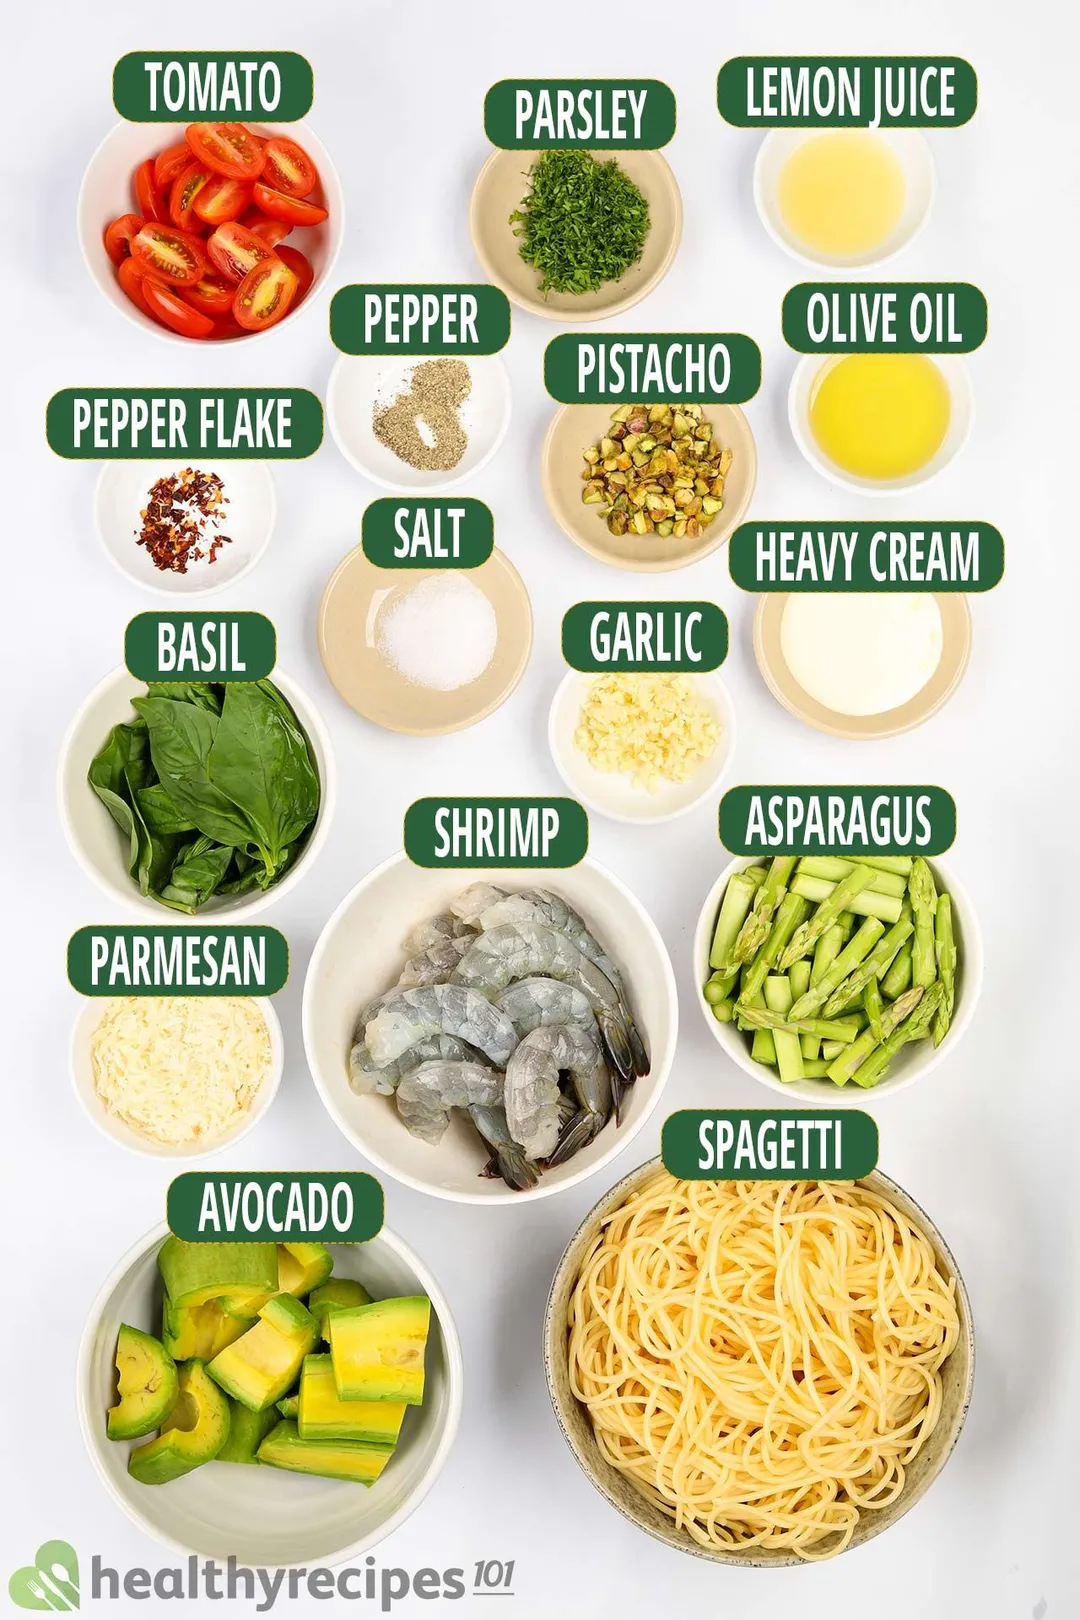 Ingredients for avocado pasta, including bowls of spaghetti, avocado slices, raw shrimp, and others.